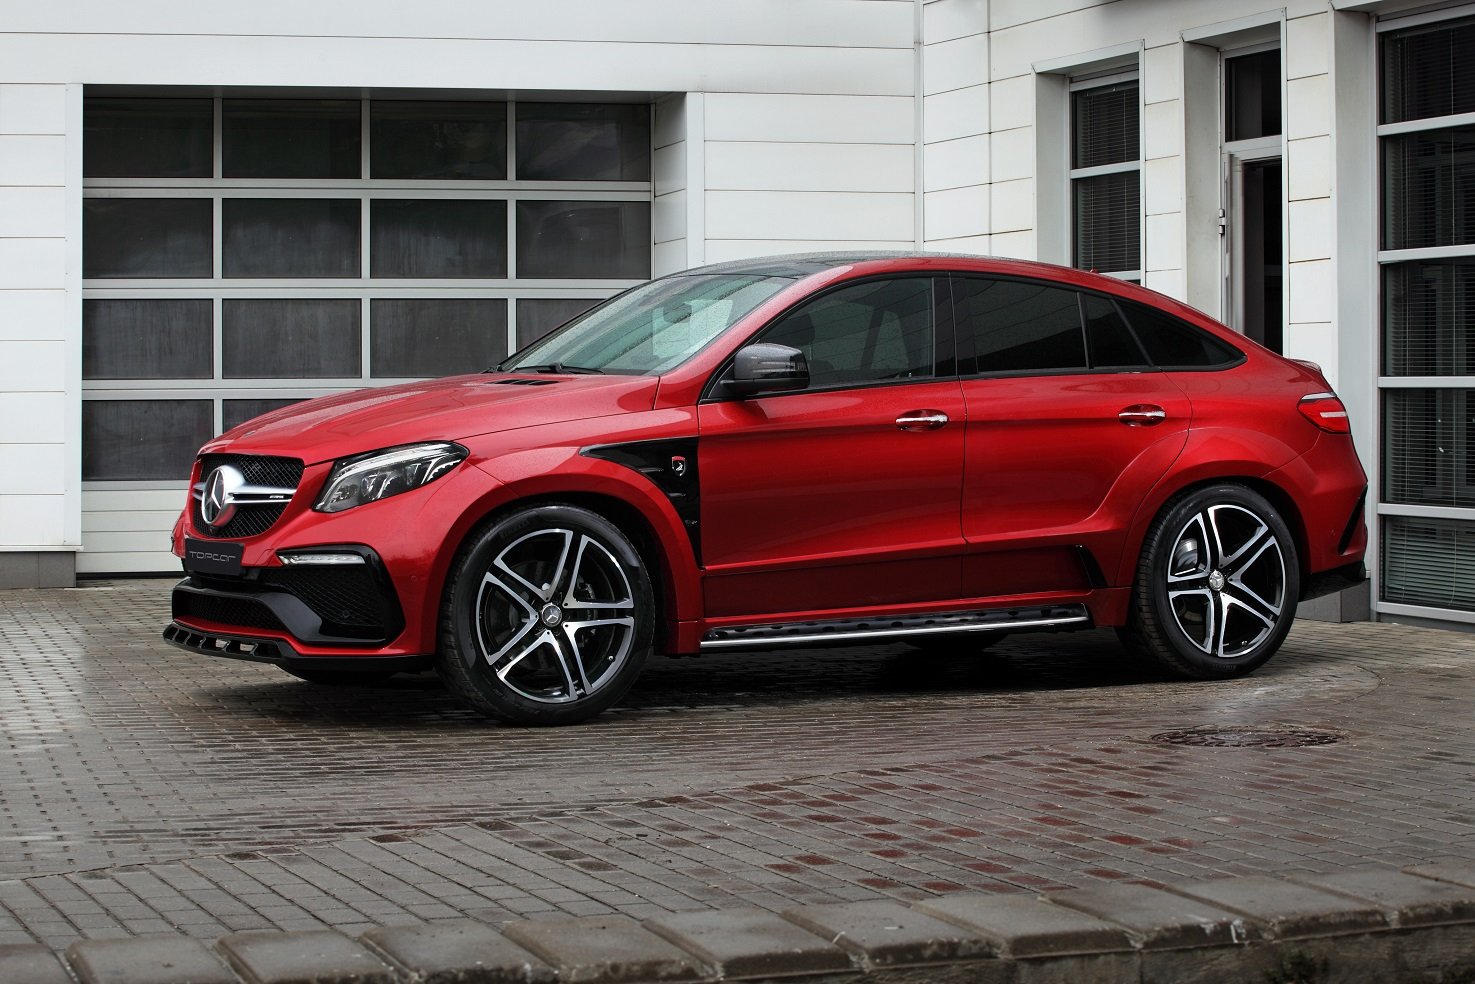 topcar, Mercedes, Benz, Gle, Coupe, Inferno, Cars, Suv, Red, Modified,  c292 , 2016 Wallpaper